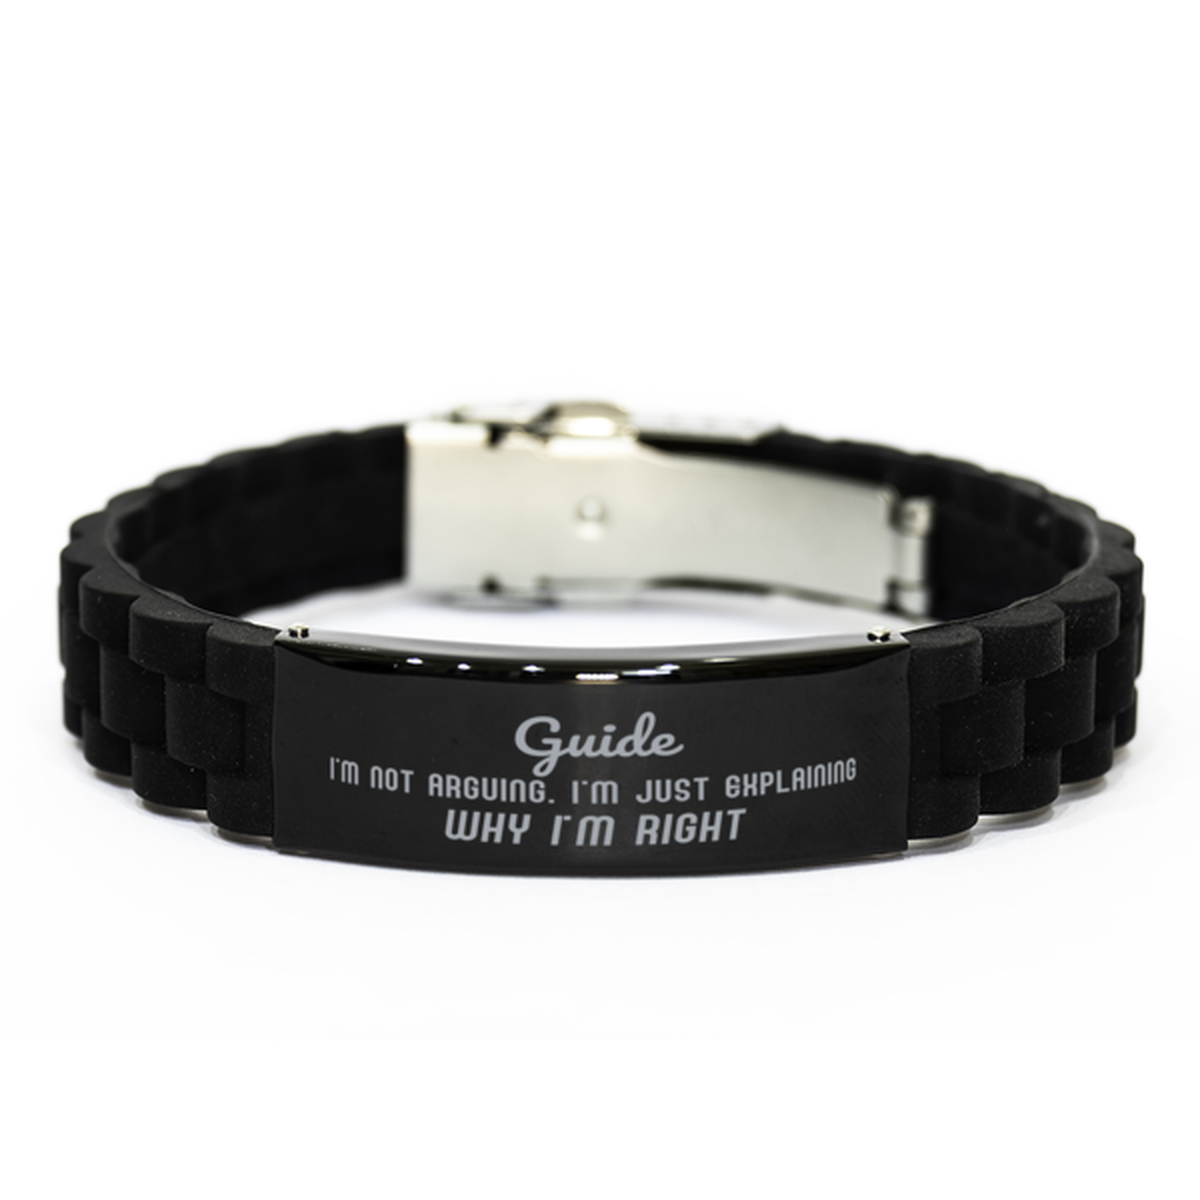 Guide I'm not Arguing. I'm Just Explaining Why I'm RIGHT Black Glidelock Clasp Bracelet, Funny Saying Quote Guide Gifts For Guide Graduation Birthday Christmas Gifts for Men Women Coworker